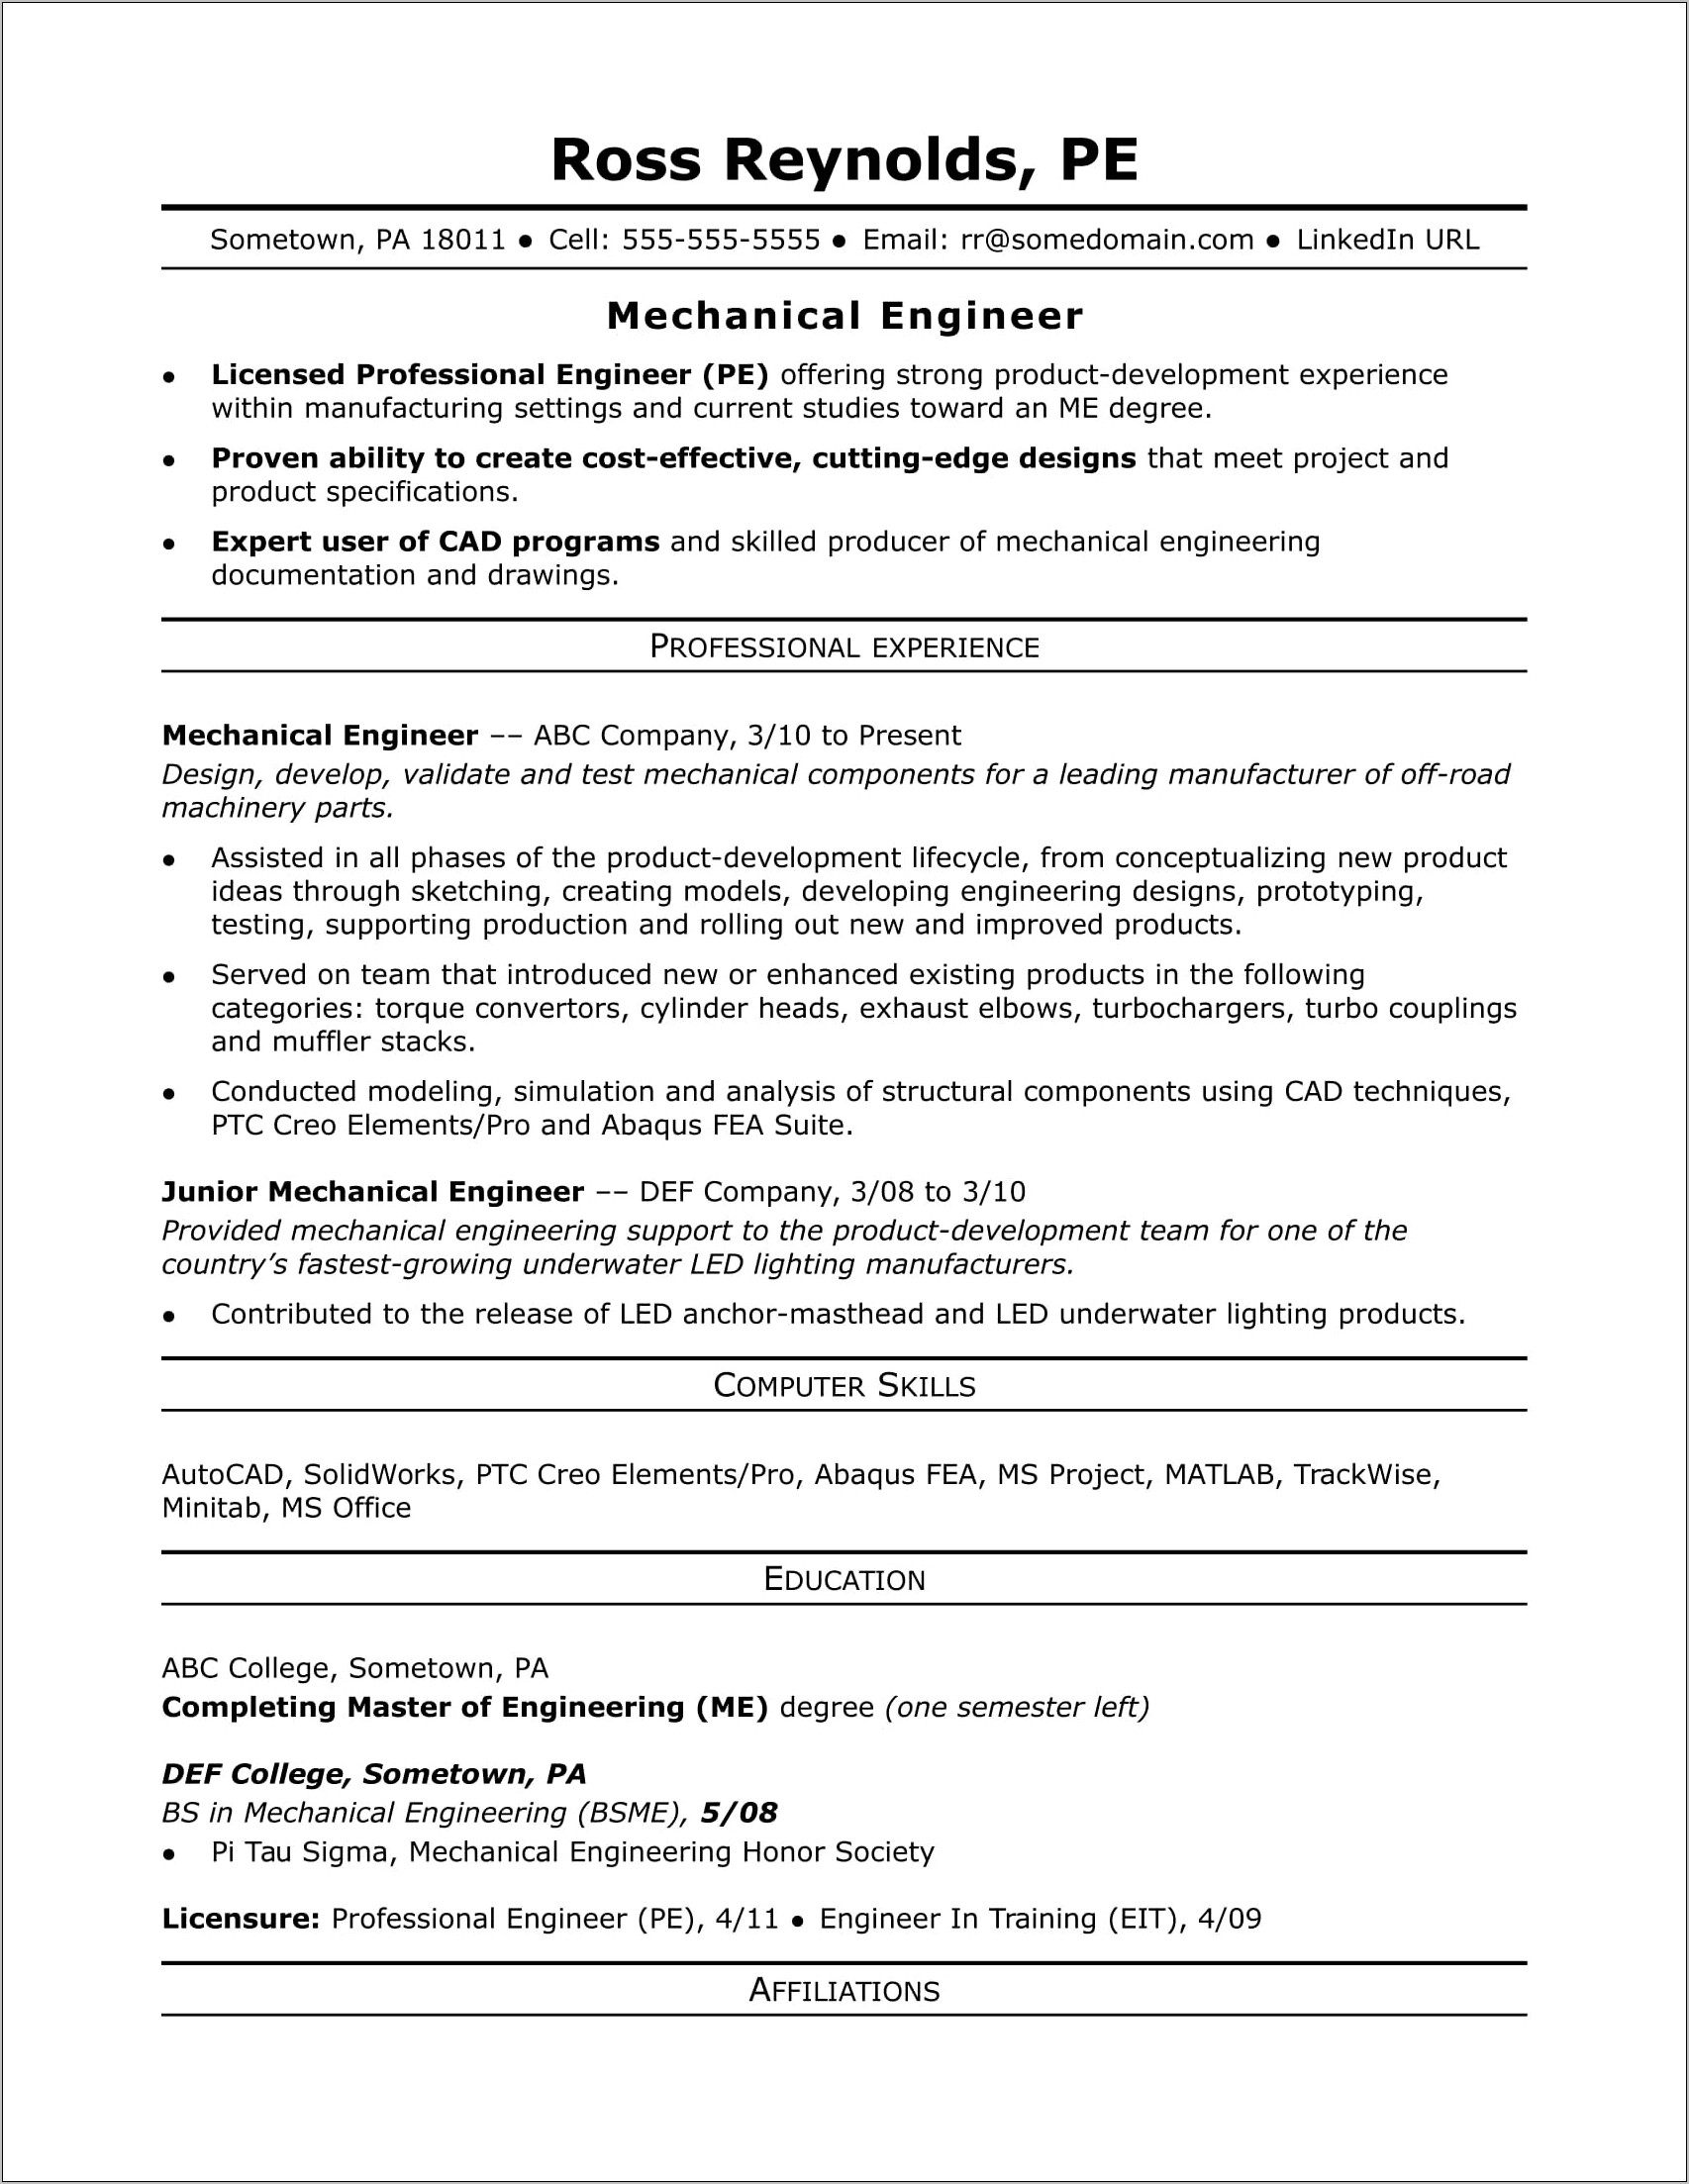 Resume Left College To Gain Experience